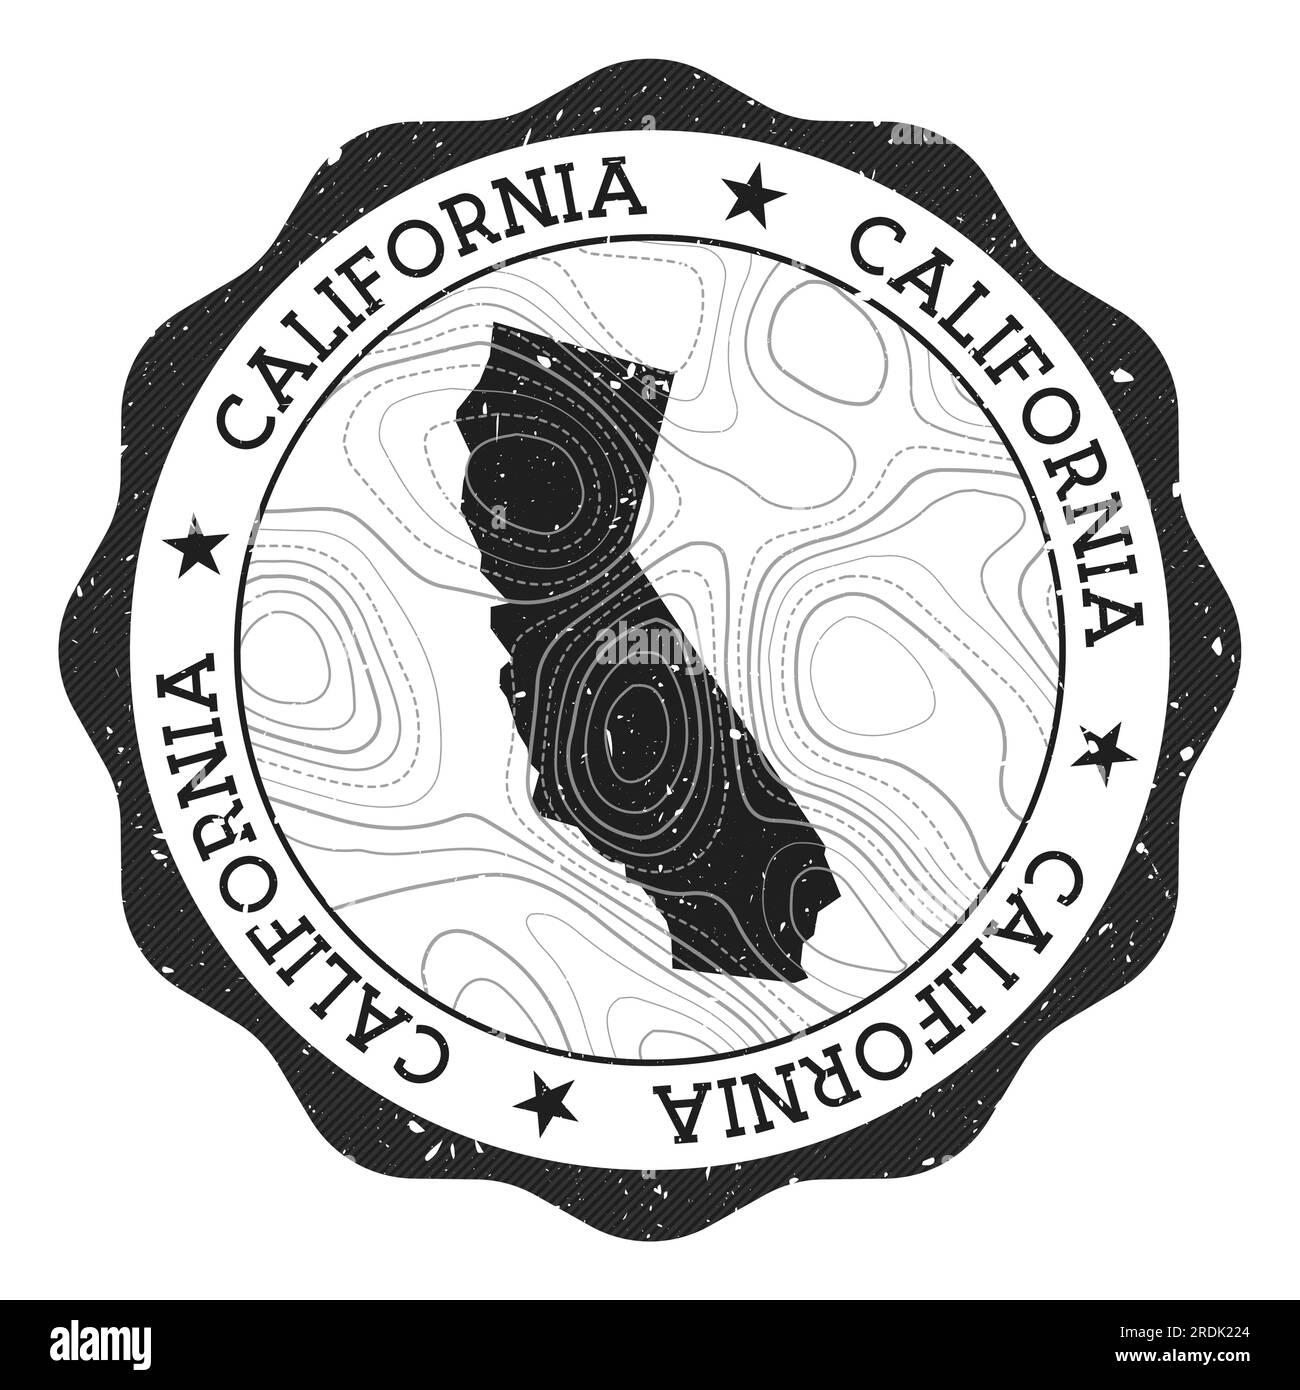 California outdoor stamp. Round sticker with map of us state with topographic isolines. Vector illustration. Can be used as insignia, logotype, label, Stock Vector